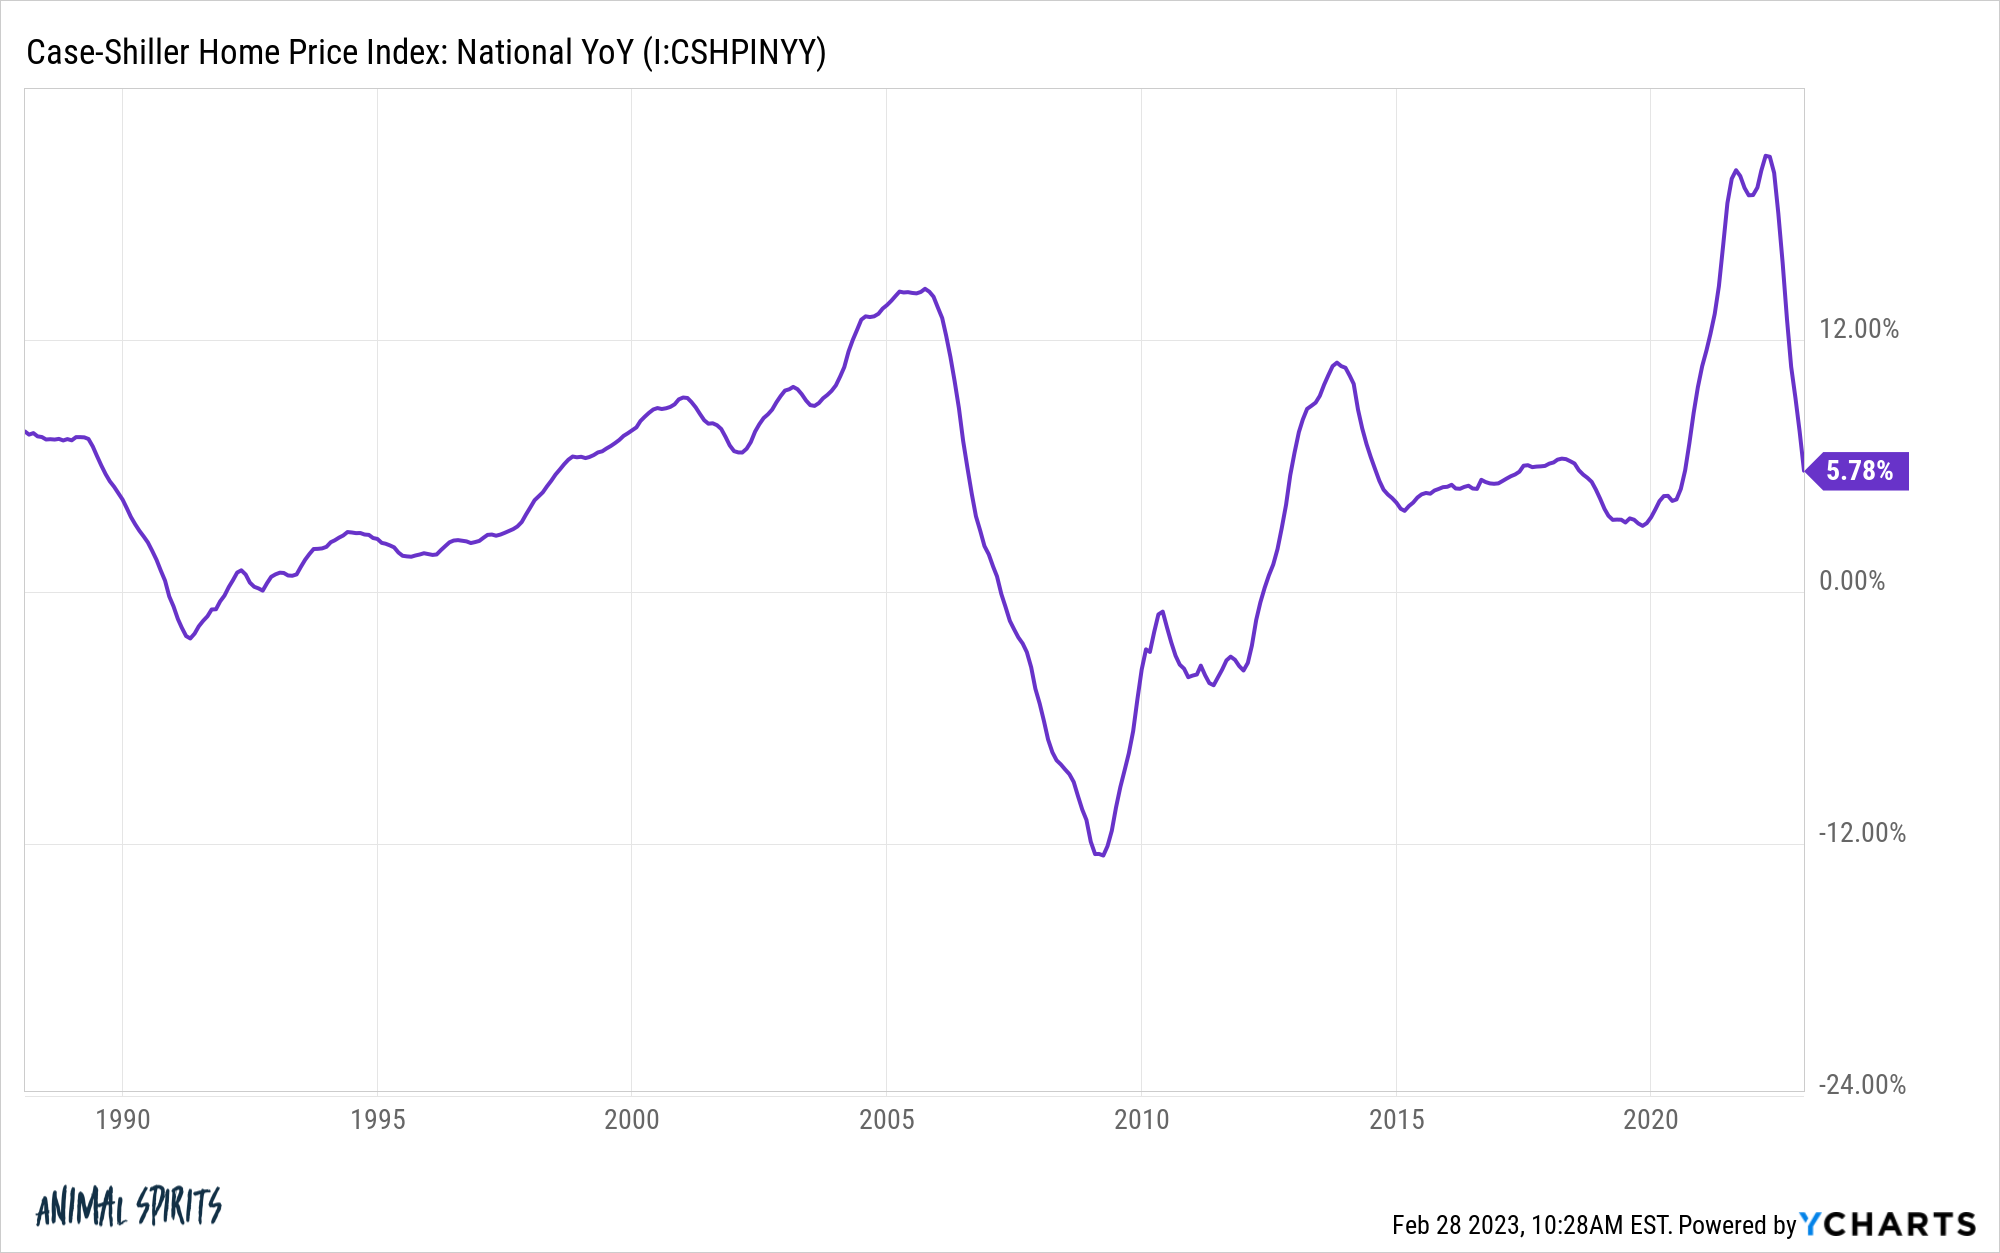 Case-Shiller Home Price Index: National YoY